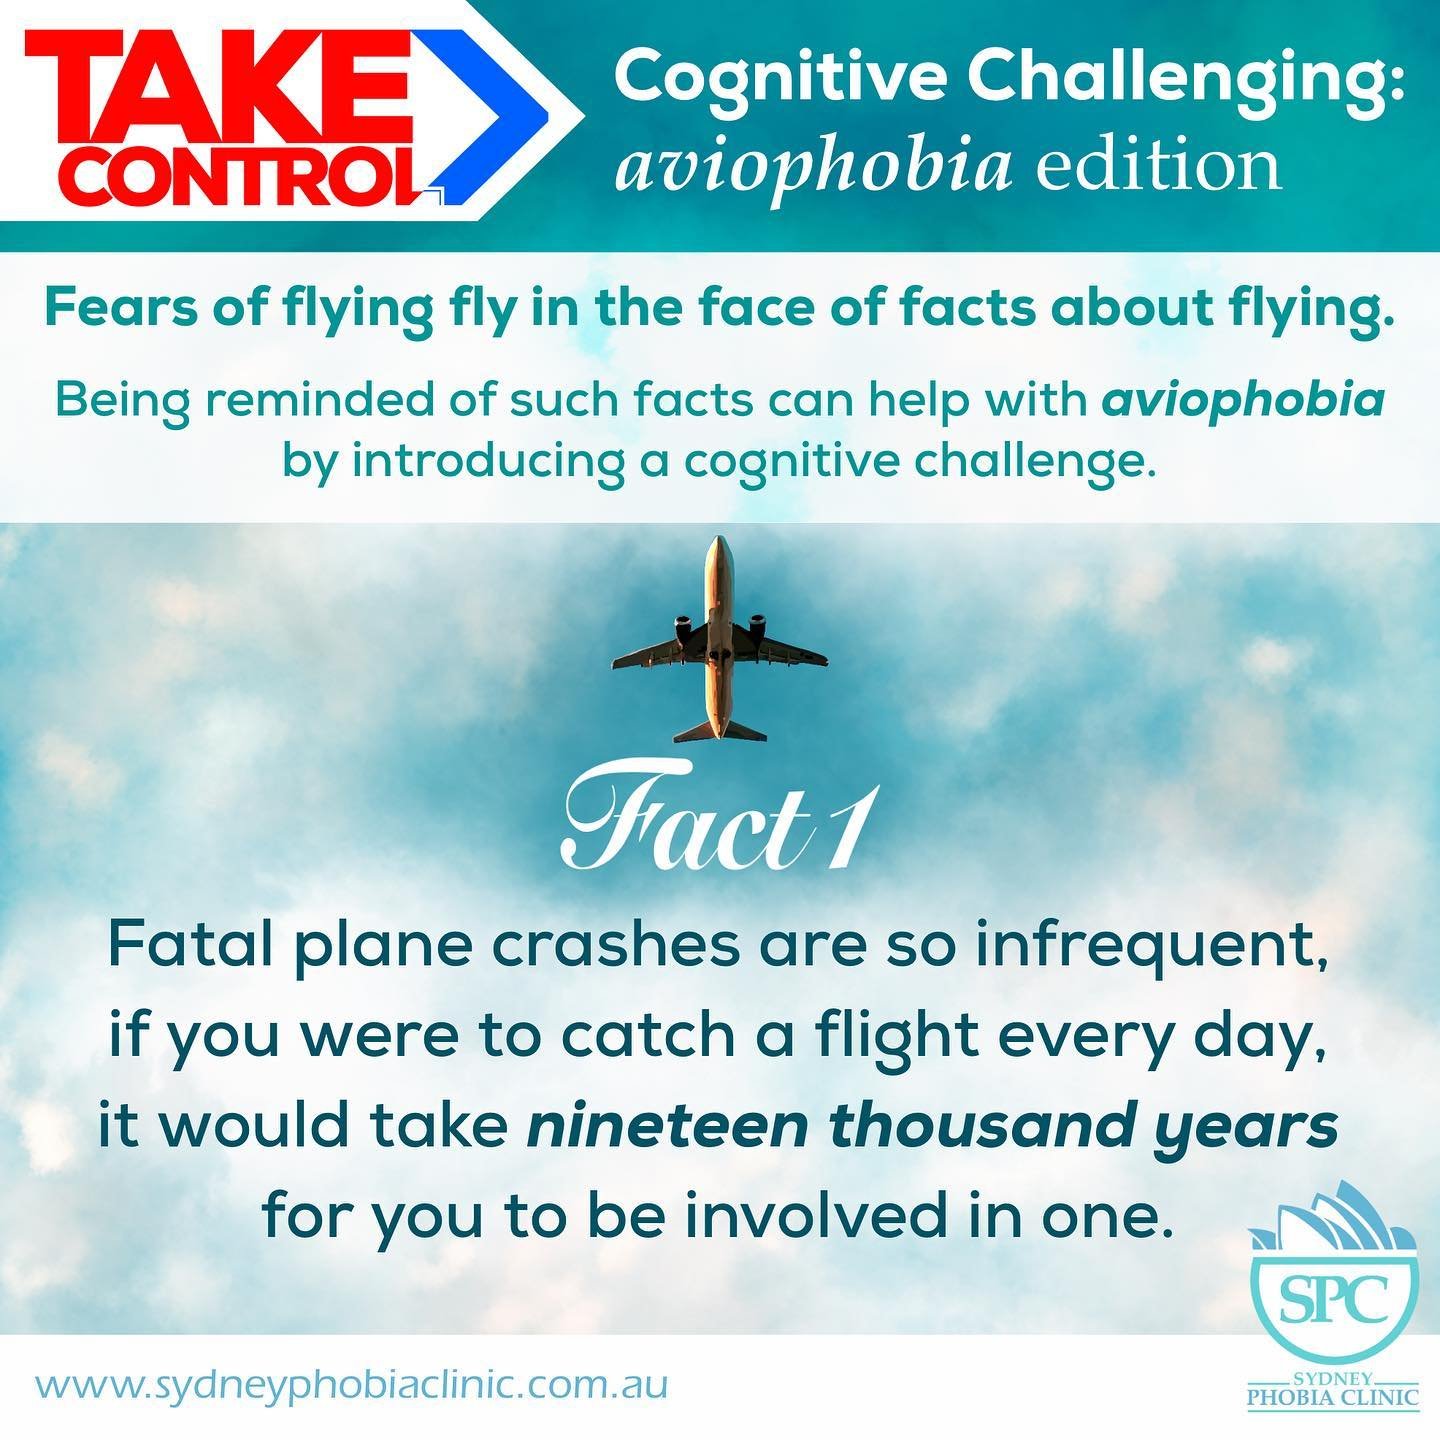 Cognitive Challenging: Aviophobia Edition
Fears of flying fly in the face of facts about flying. Being reminded of such facts can help with aviophobia by introducing a cognitive challenge.

Fact 1:
Fatal plane crashes are so infrequent, if you were t